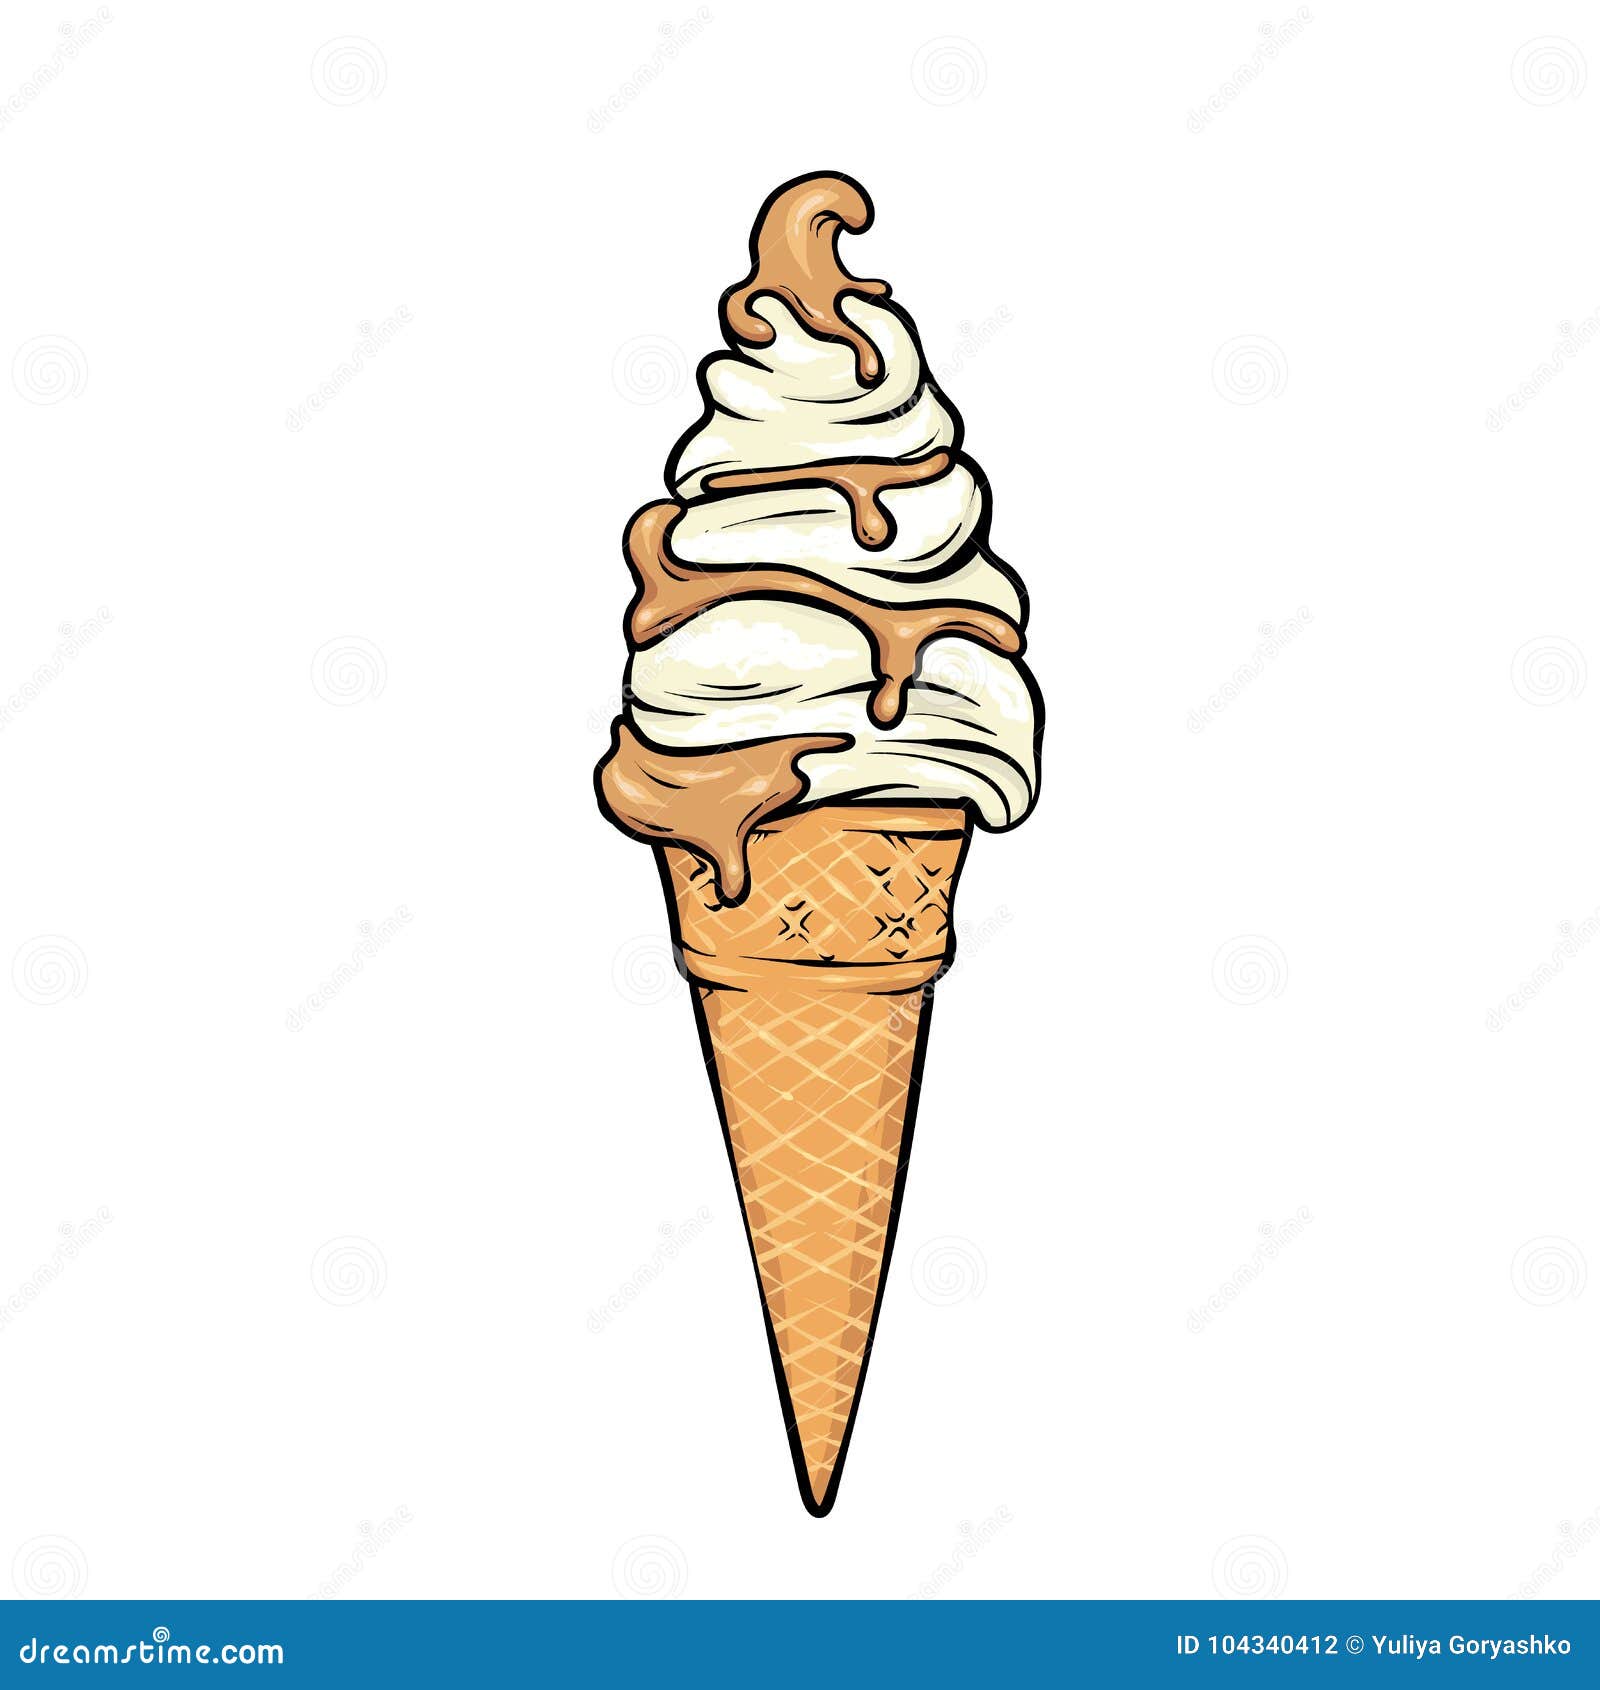 Ice Cream Coloring Pages: Add Your Favorite Colors to This 15 Images